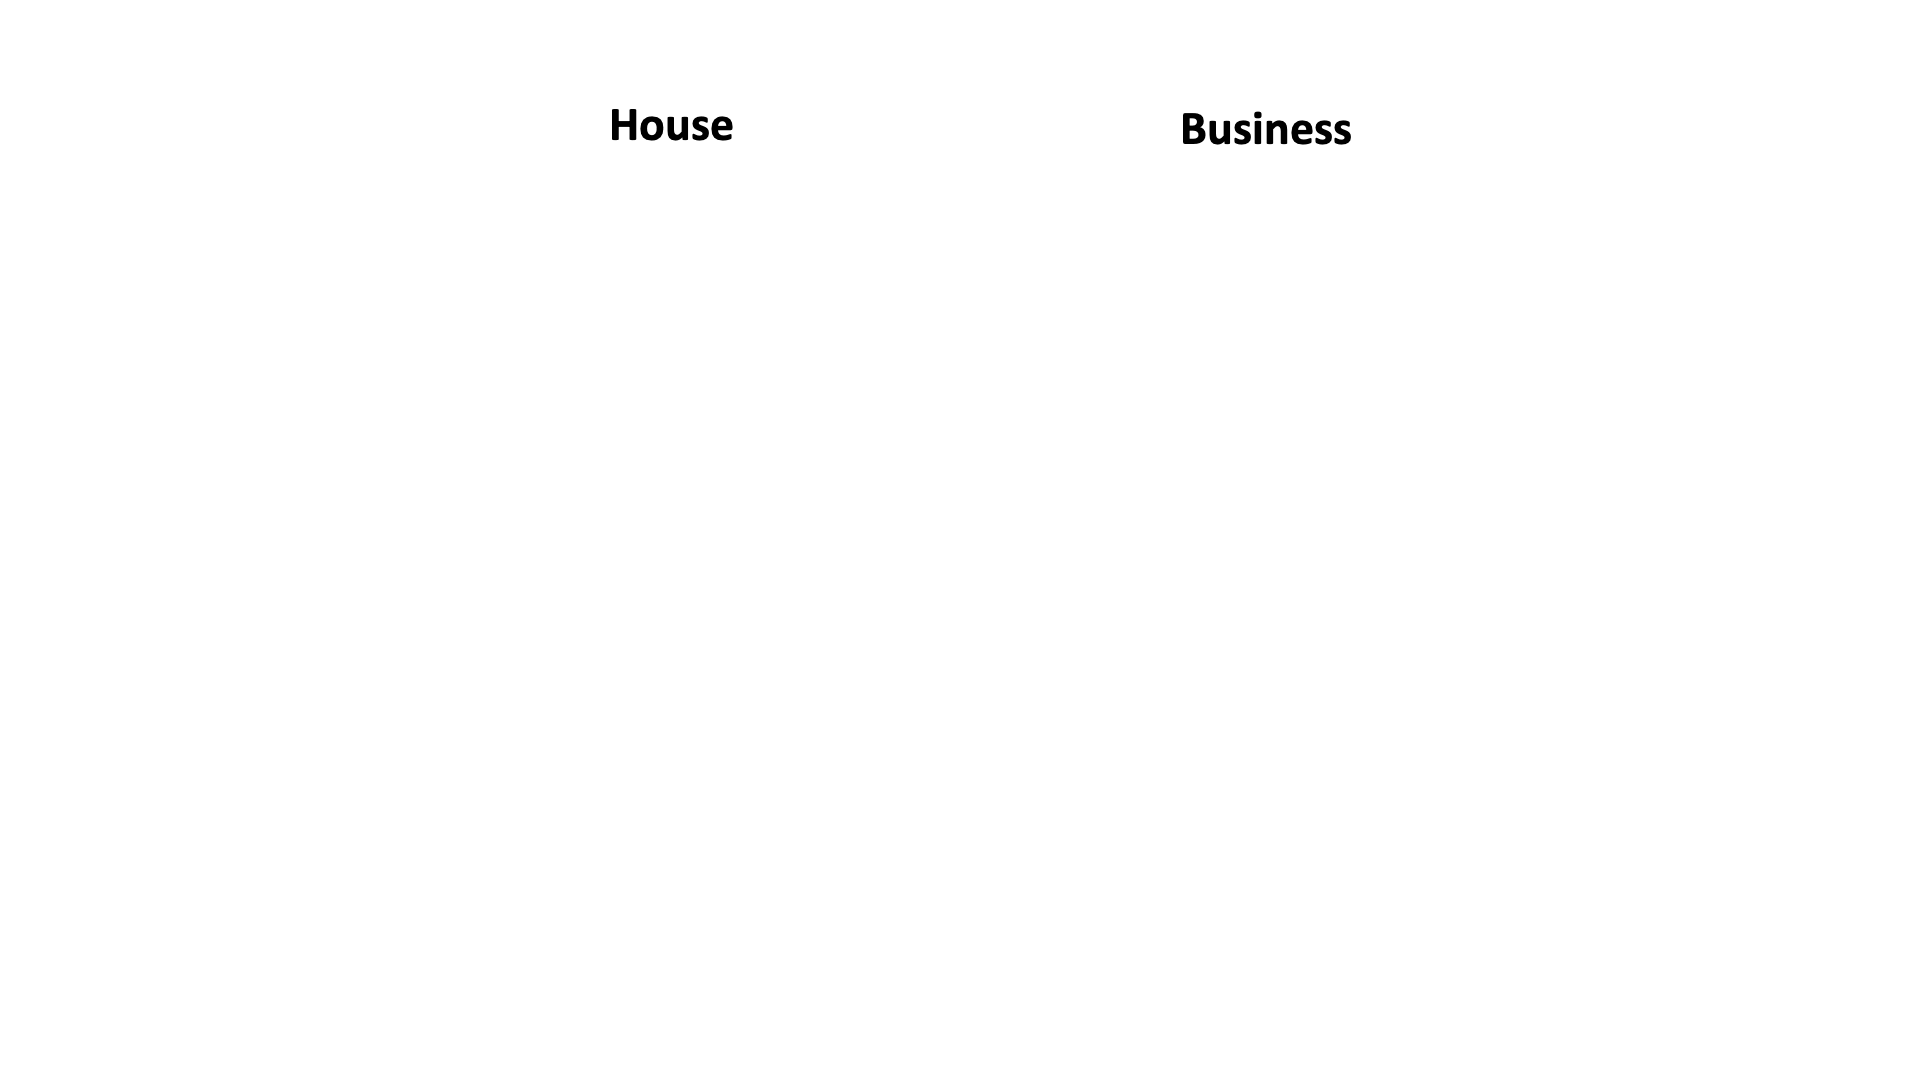 GIF showing the owner of a house vs several owners of a business